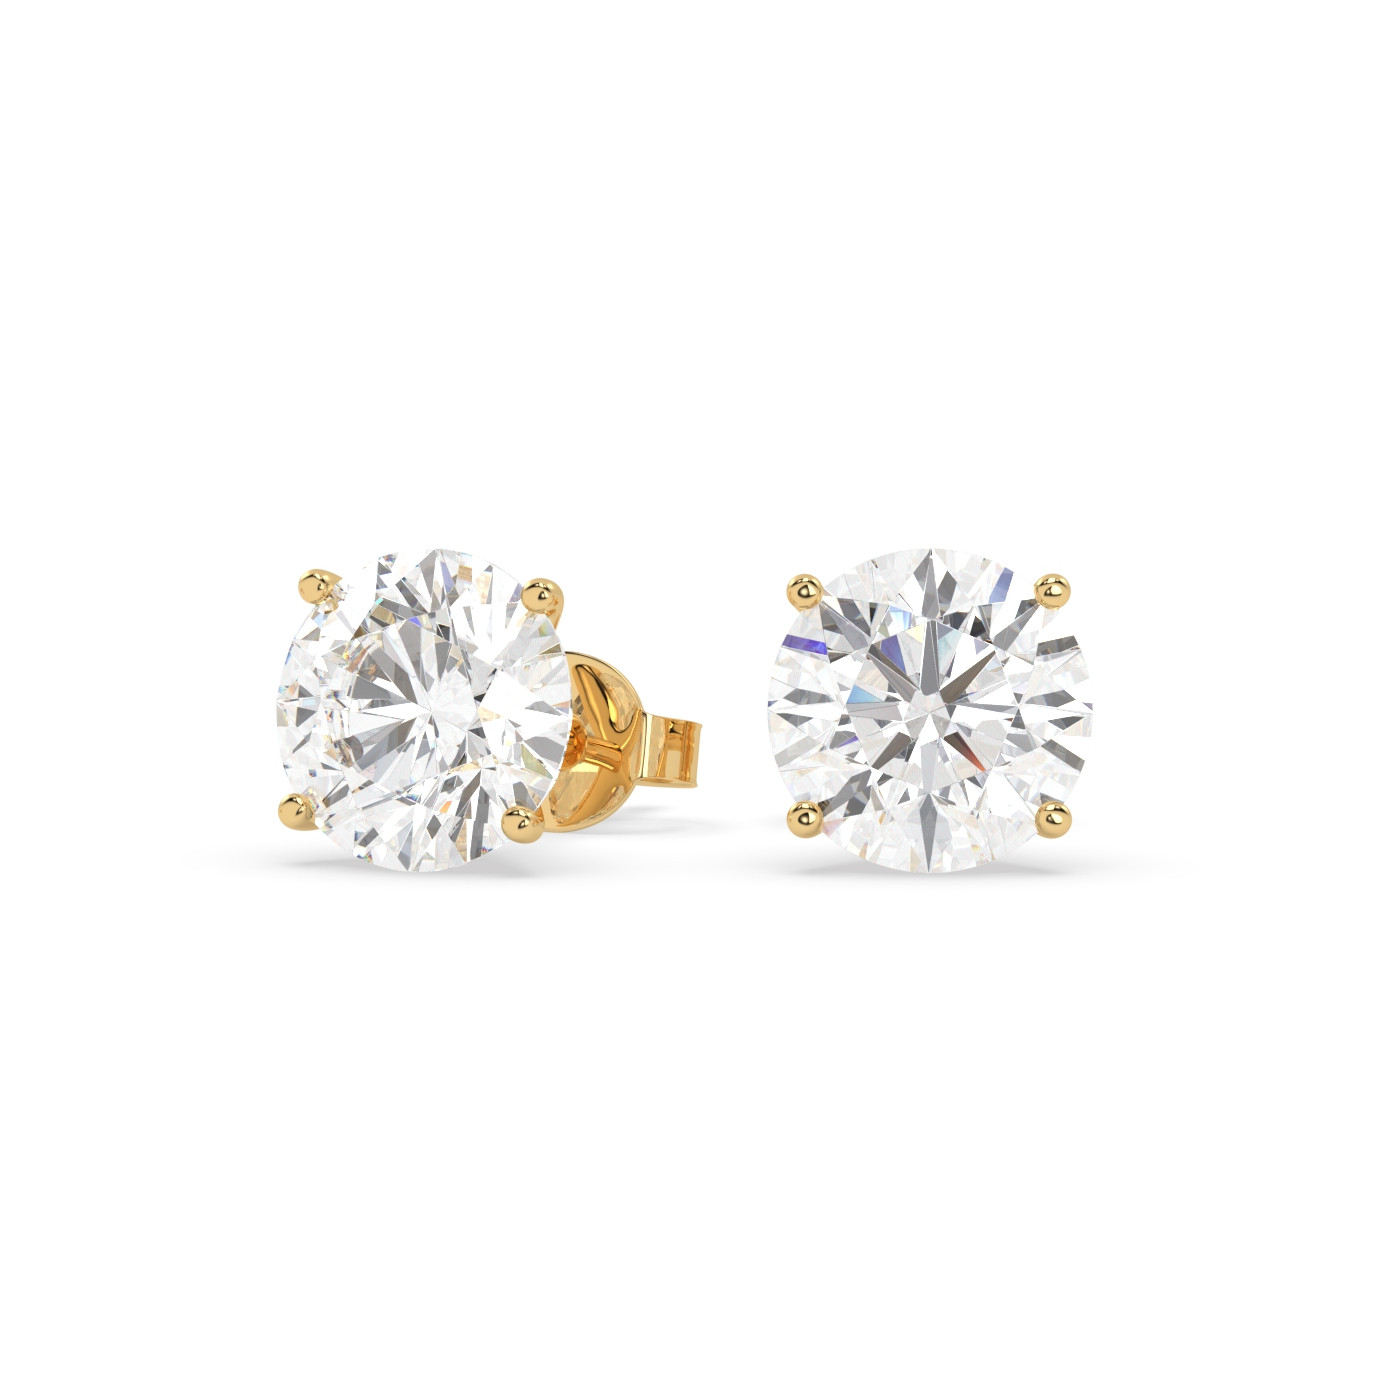 18k yellow gold  1.0 carat round stud earrings with butterfly back Photos & images